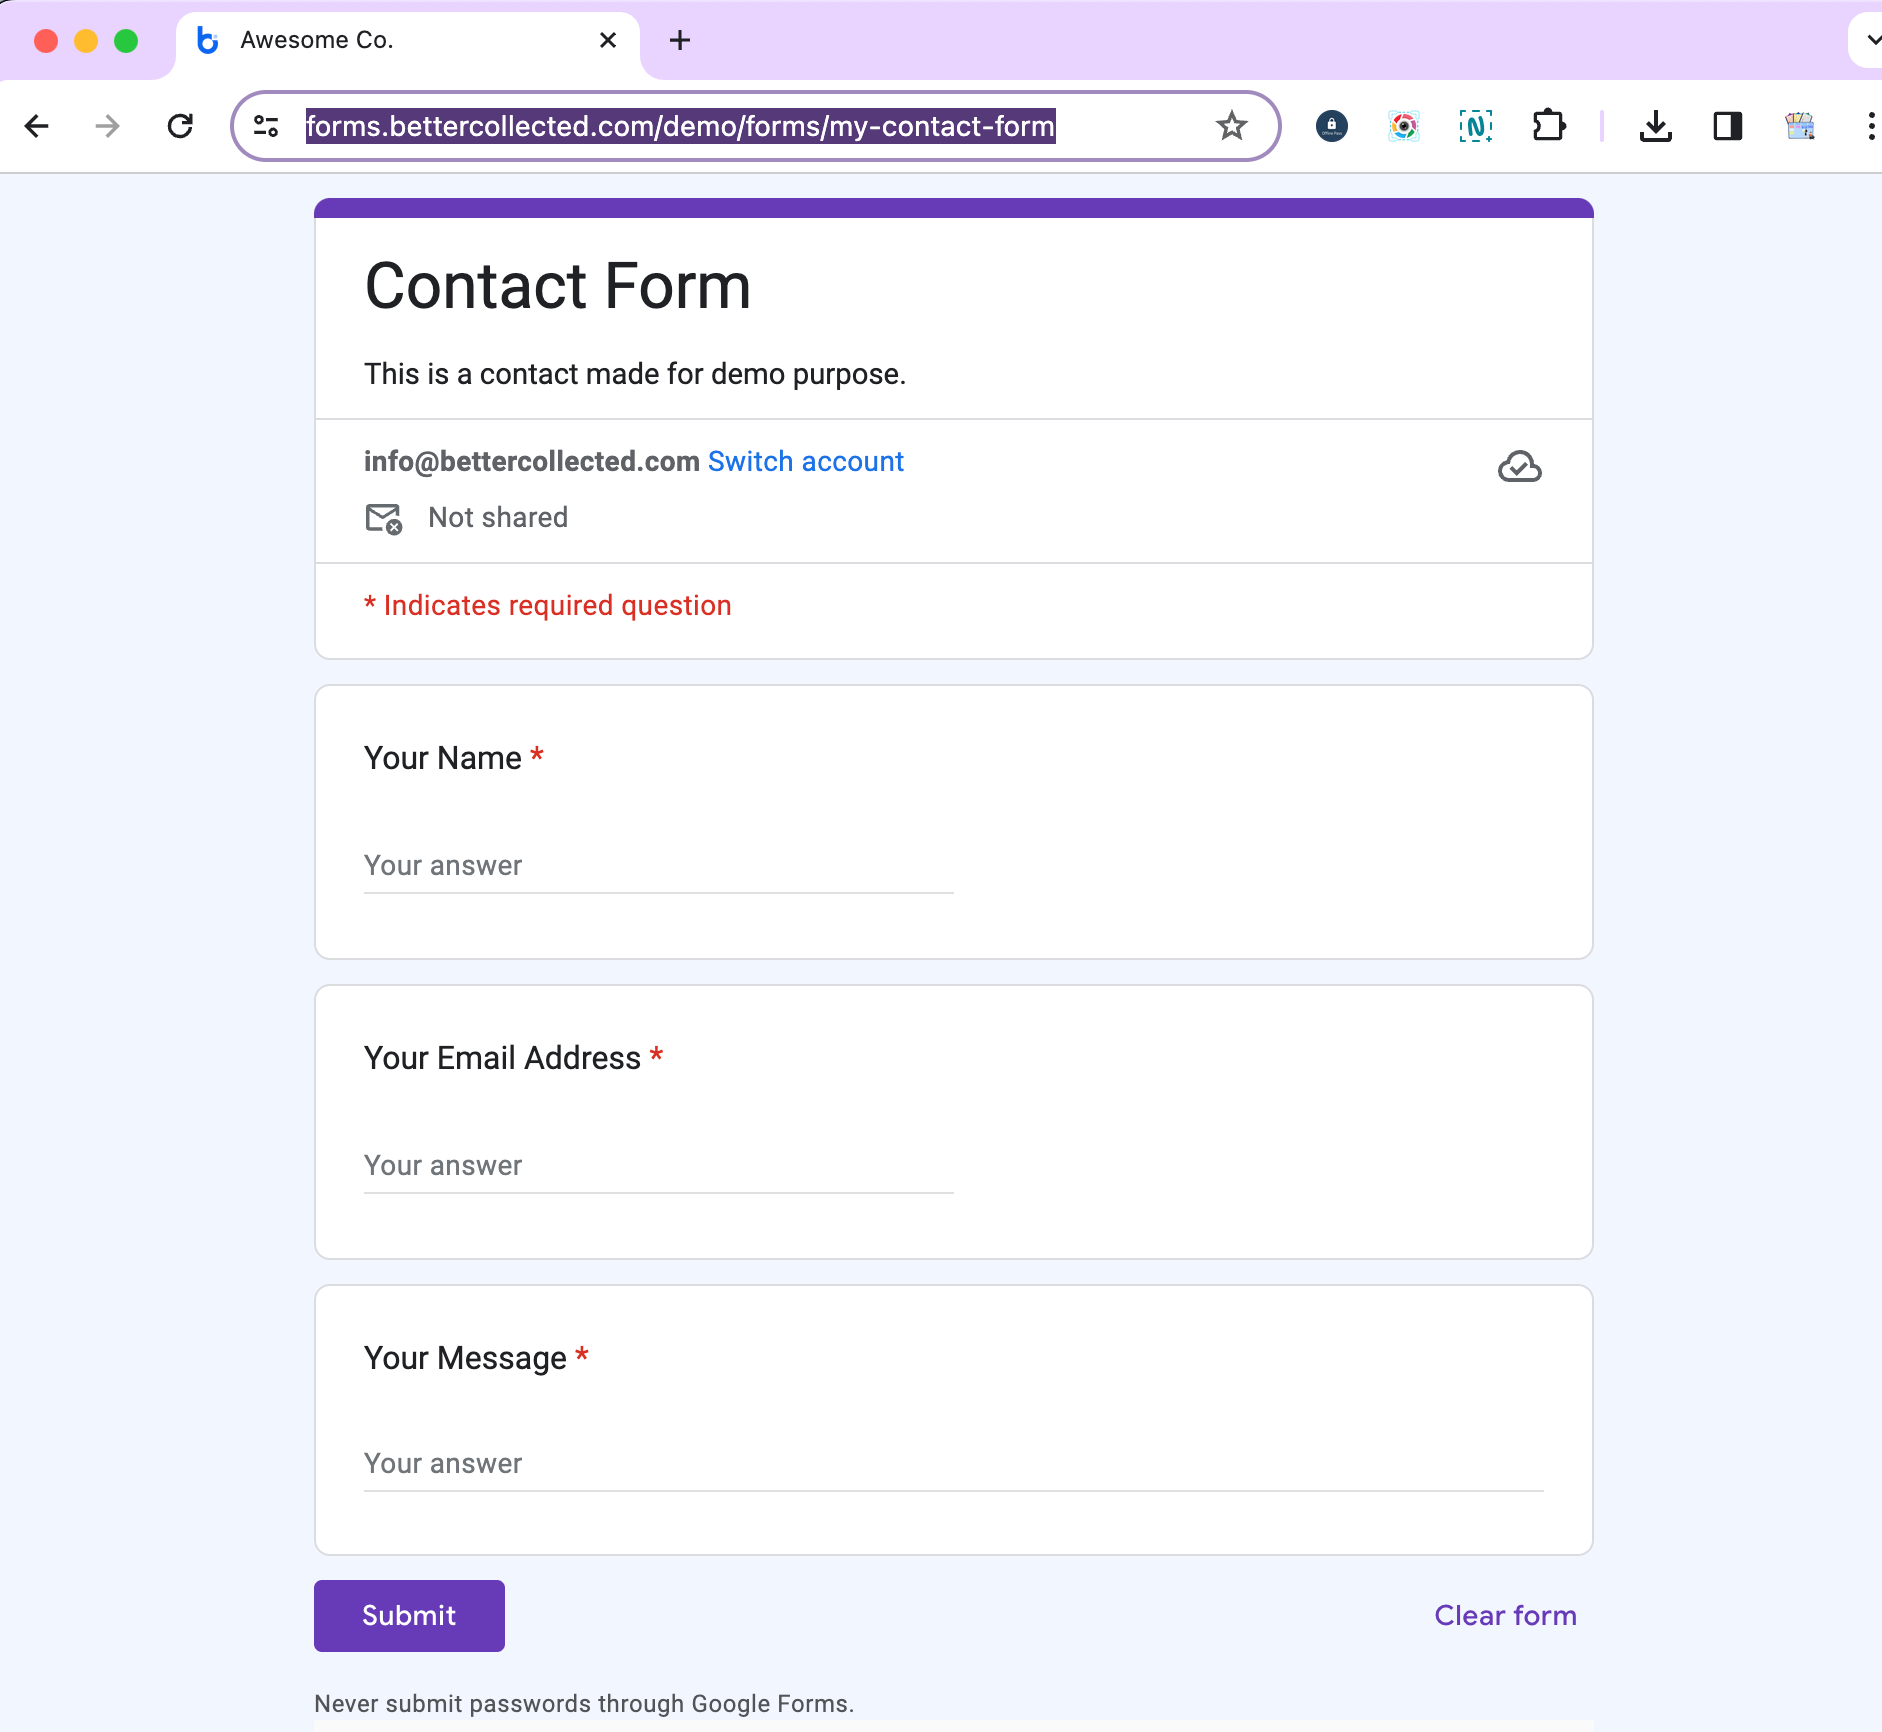 How to customize Google Form link?